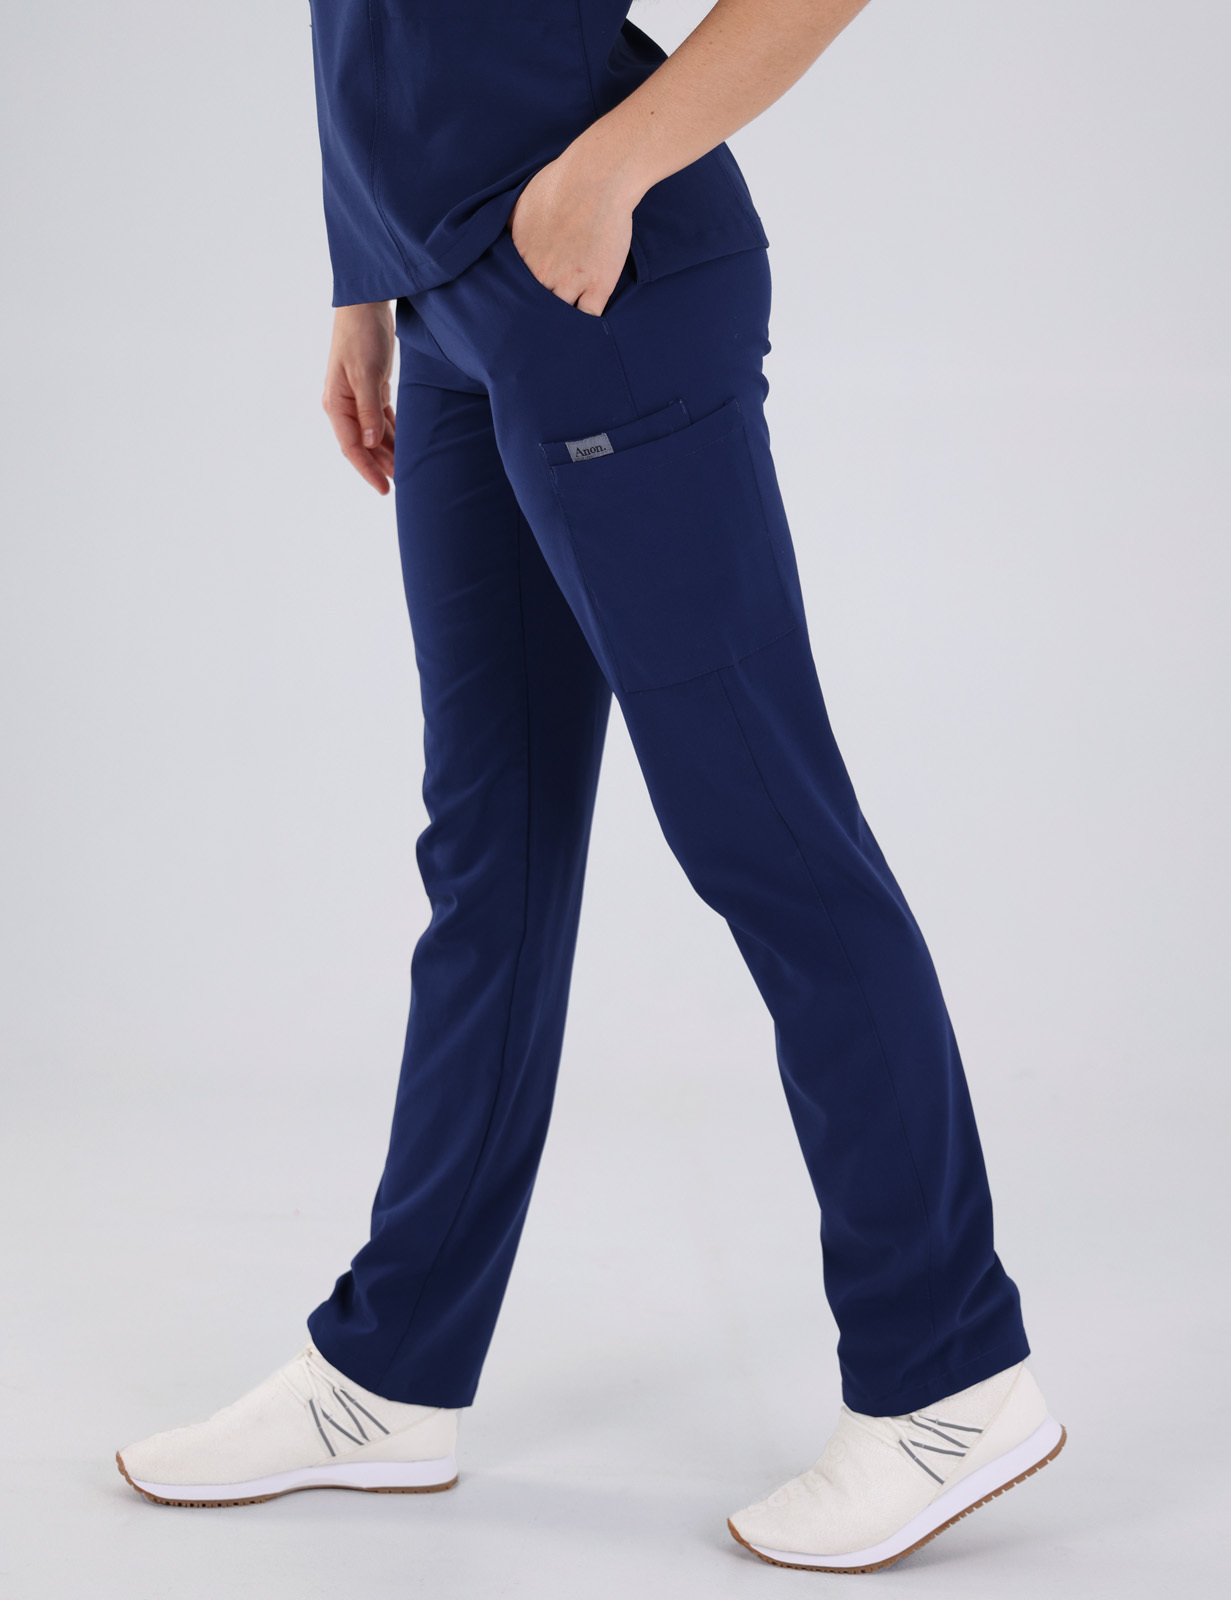 Anon Women's Scrub Pants (Whisper Collection) Poly/Spandex - Midnight Blue - 5X Large